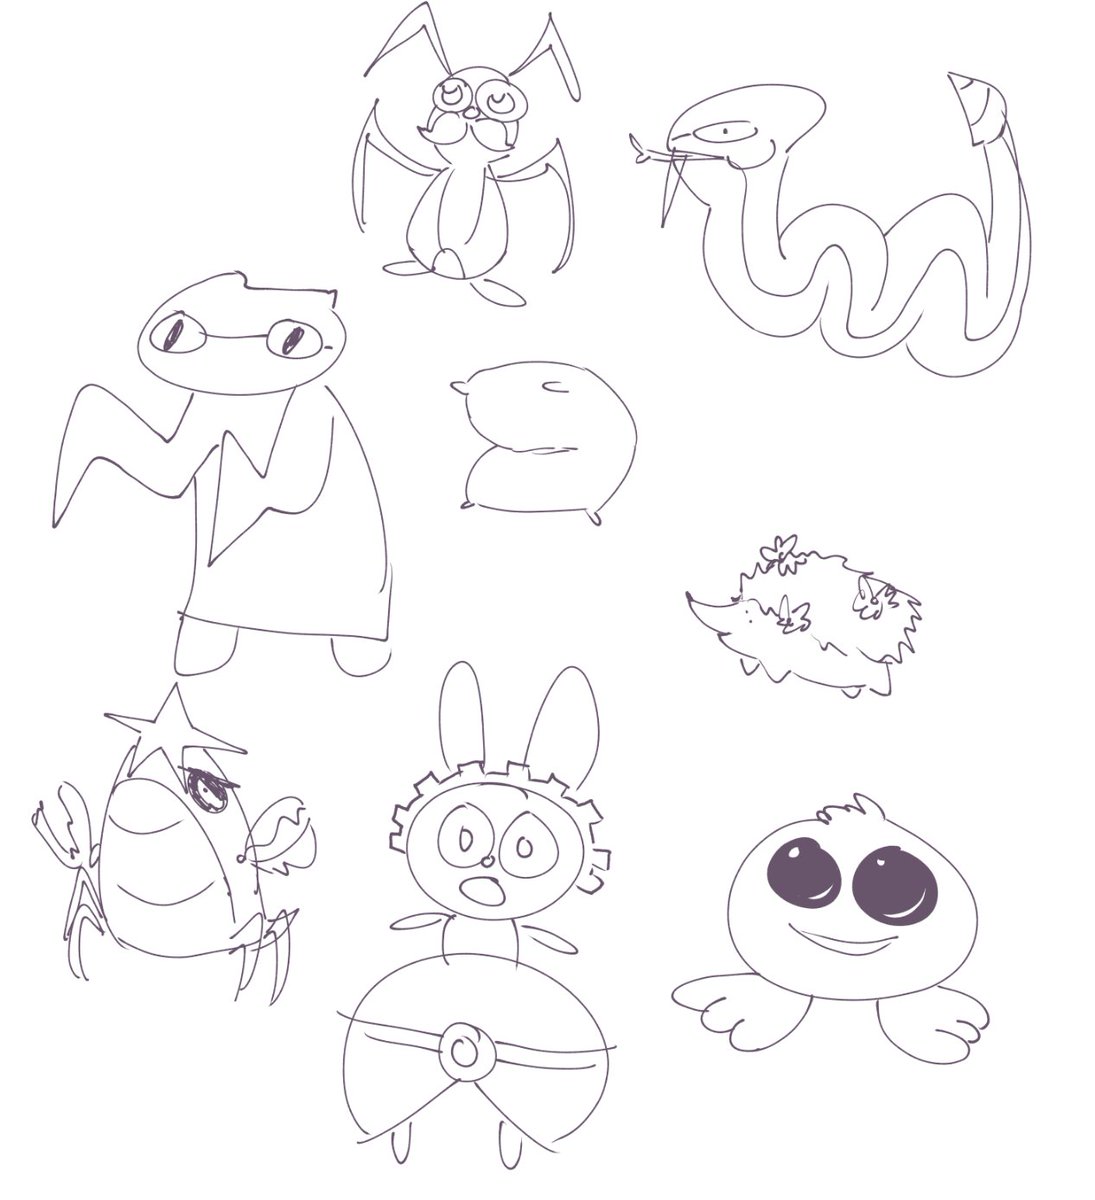 i asked my bro to give me some pokemon to draw from memory earlier 